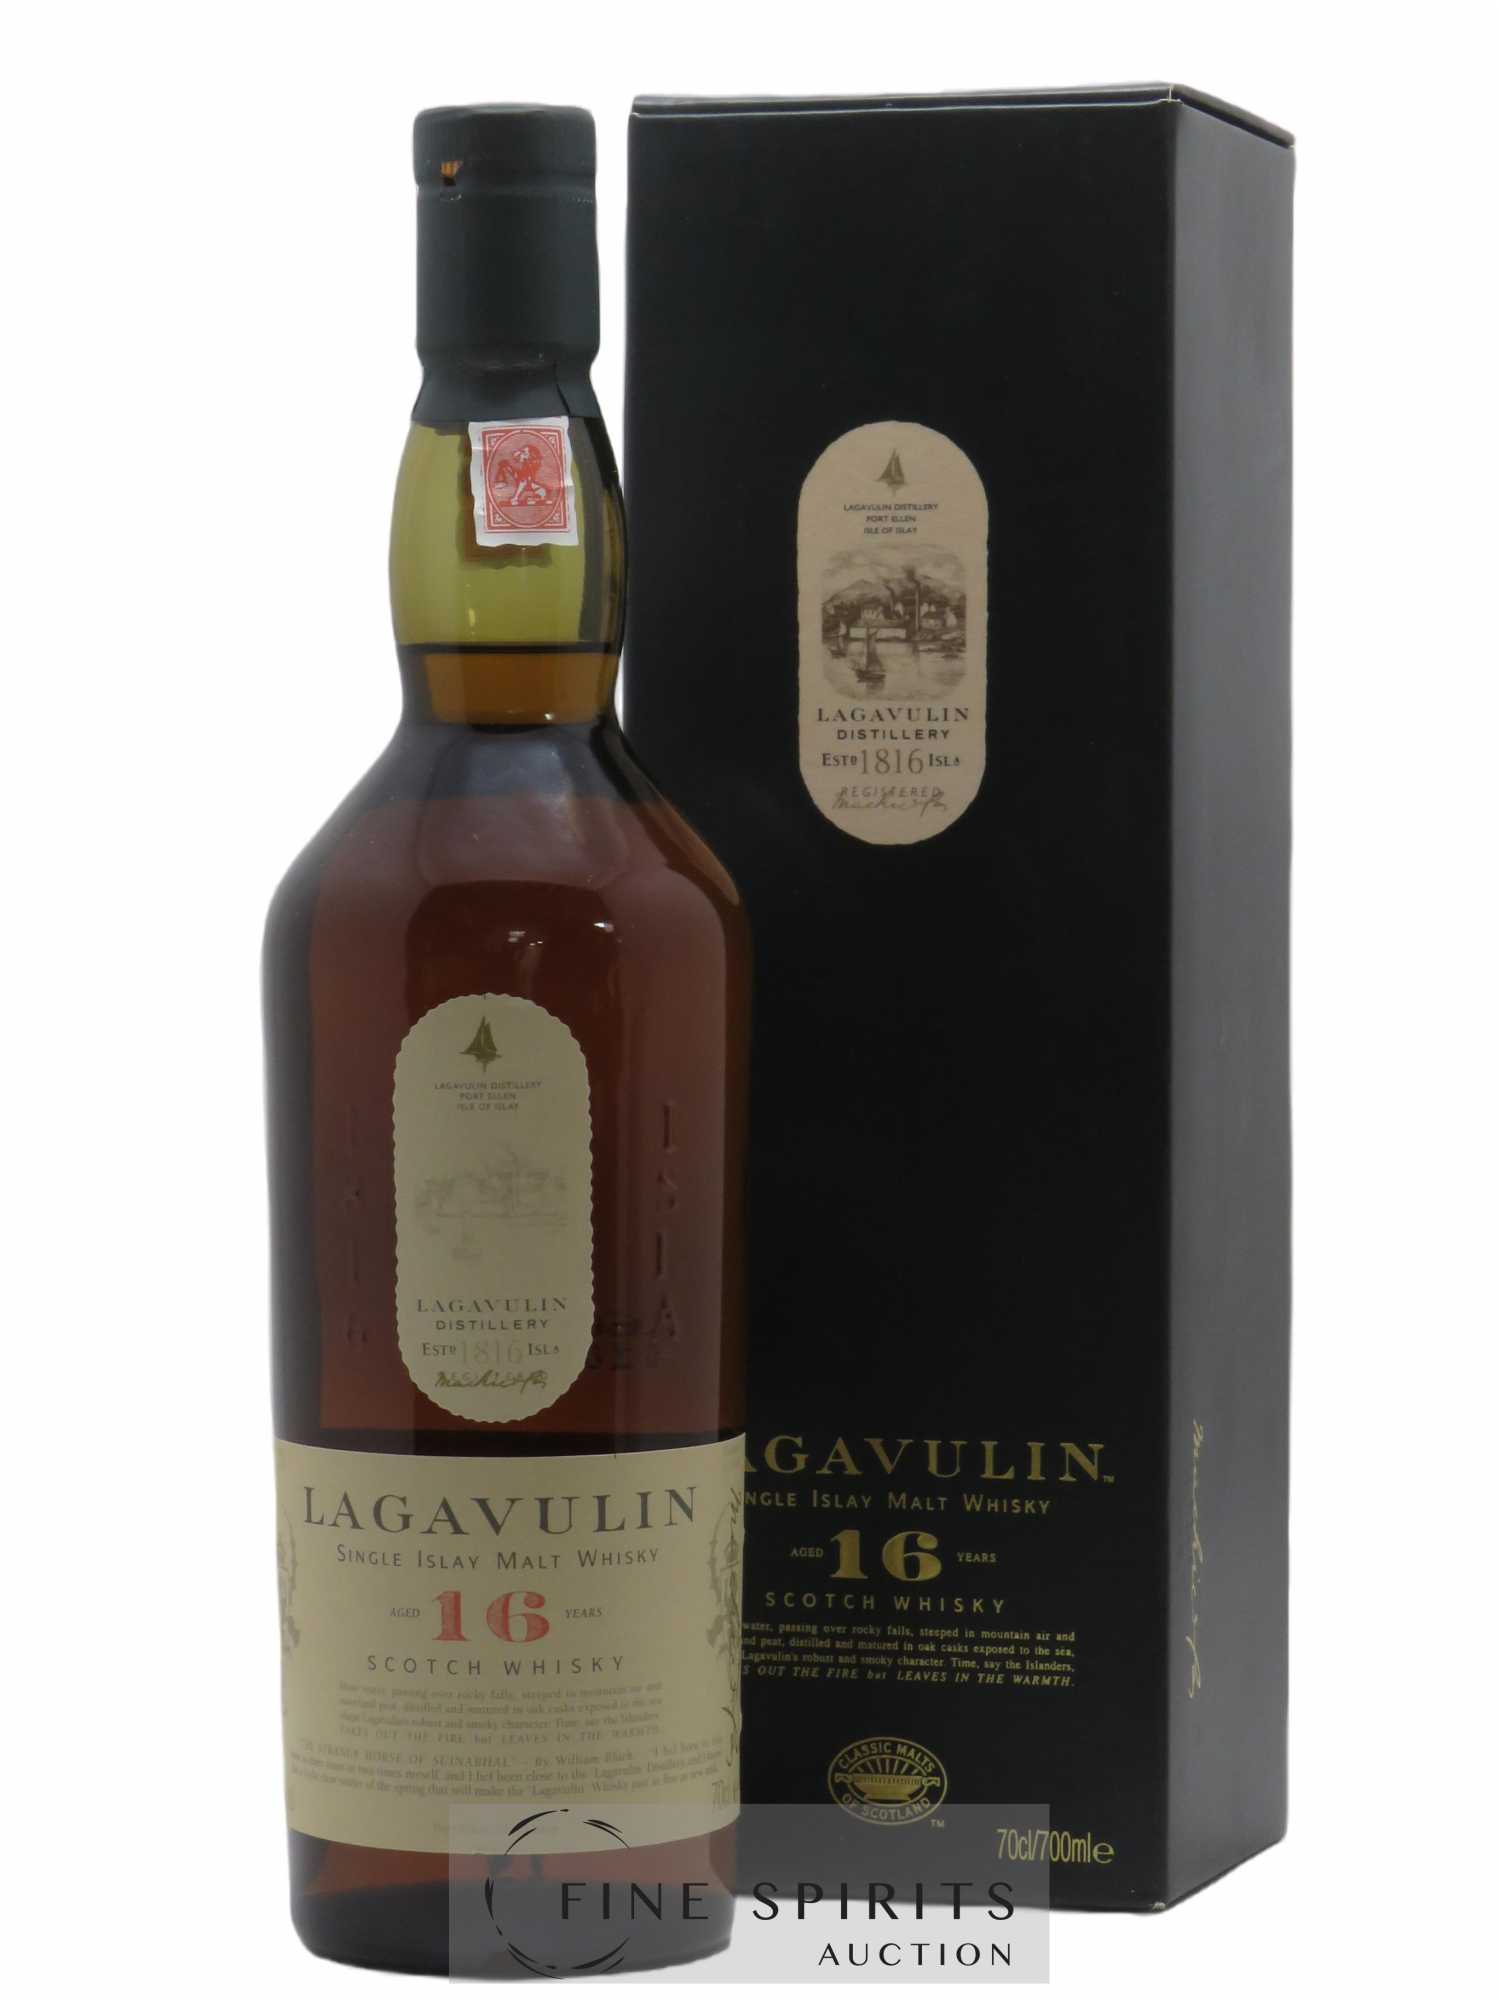 Price Lagavulin 16 years Of. 70cl. ---- Brown